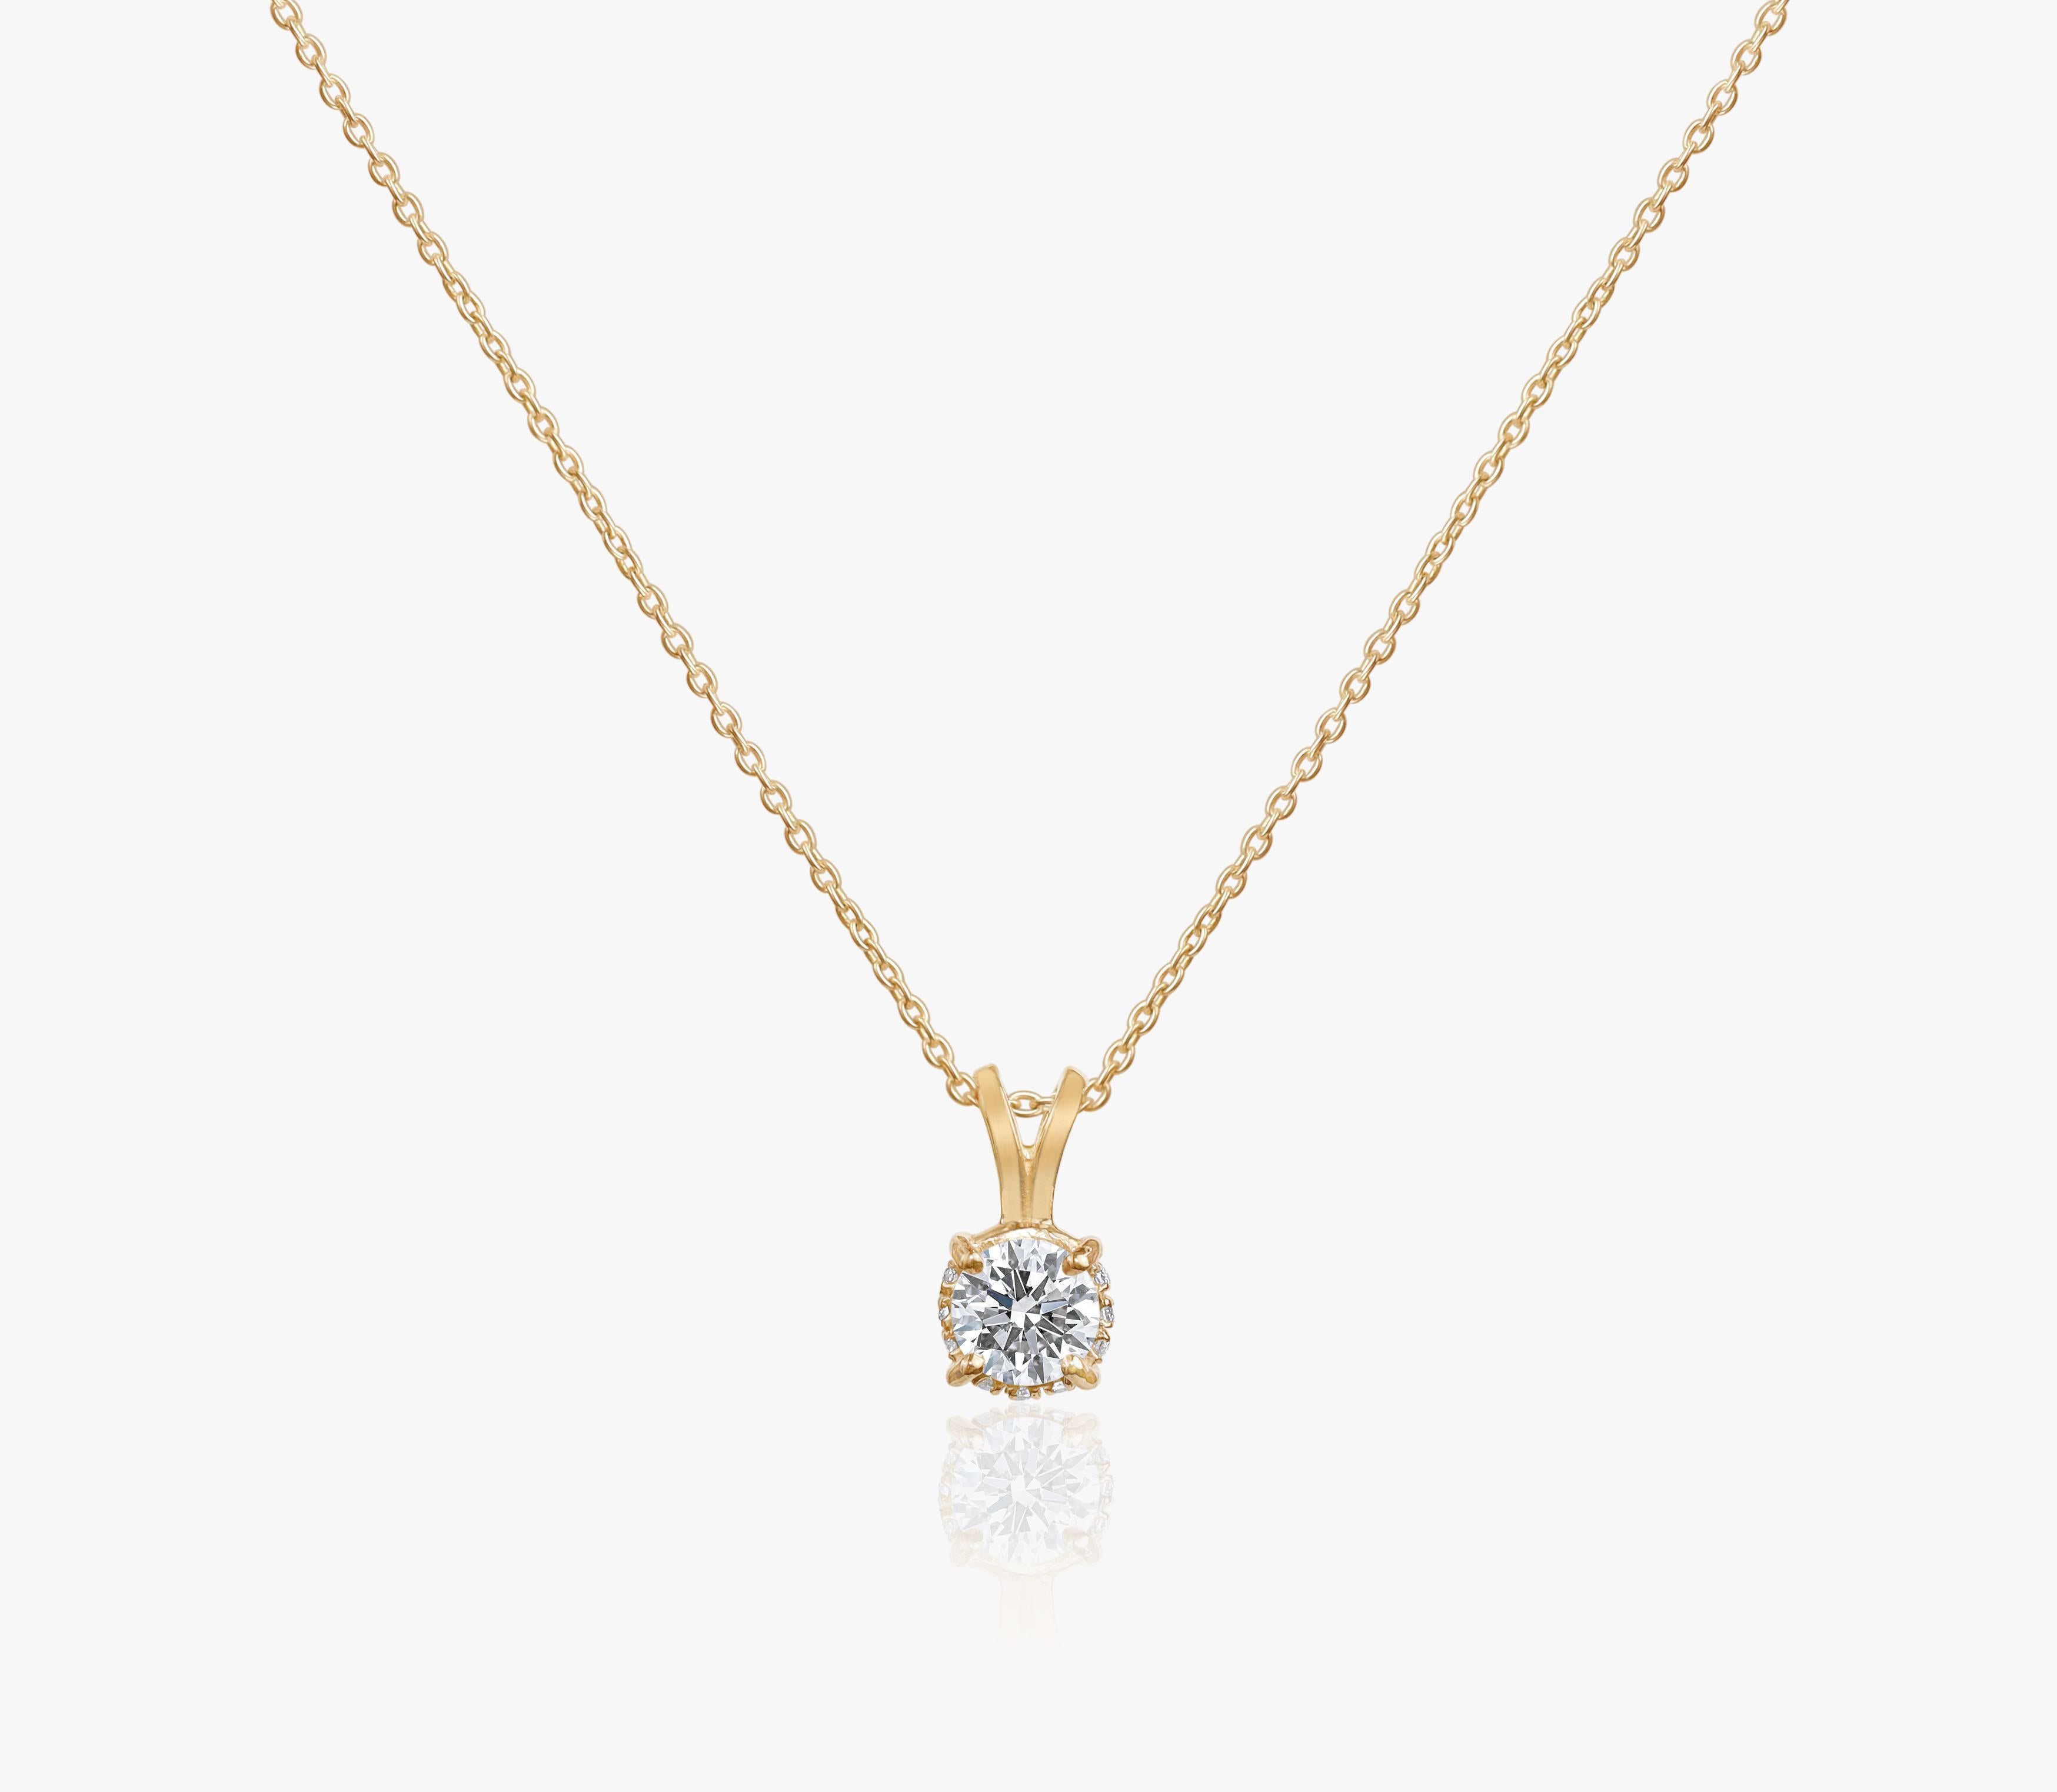 GIA Report Certified 1.5 Carat D Colorless IF Round Cut Diamond Pendant Necklace

Available in 18k Yellow gold.

Same design can be made also with other custom gemstones per request.

Product details:

- Solid gold

- Main stone - approx. 1 carat